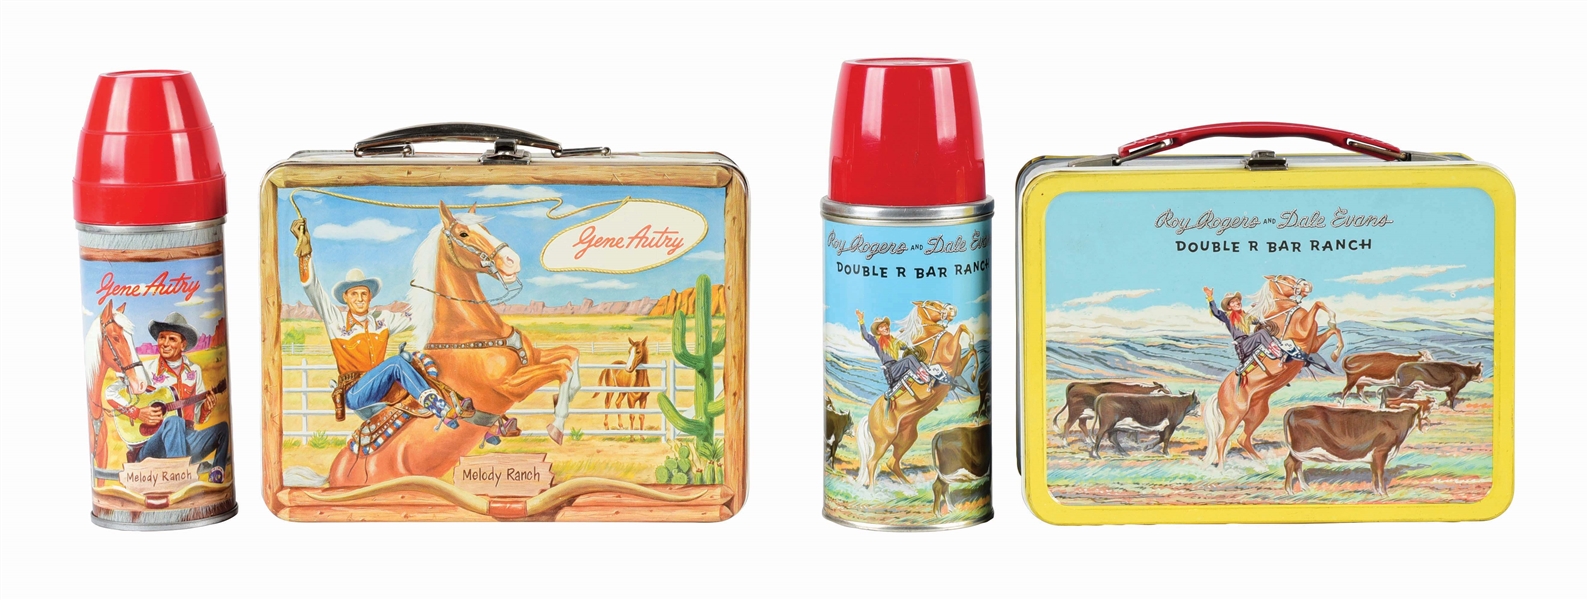 LOT OF 2: VERY HIGH GRADE WESTERN GENE AUTRY AND ROY ROGERS LUNCH BOXES.